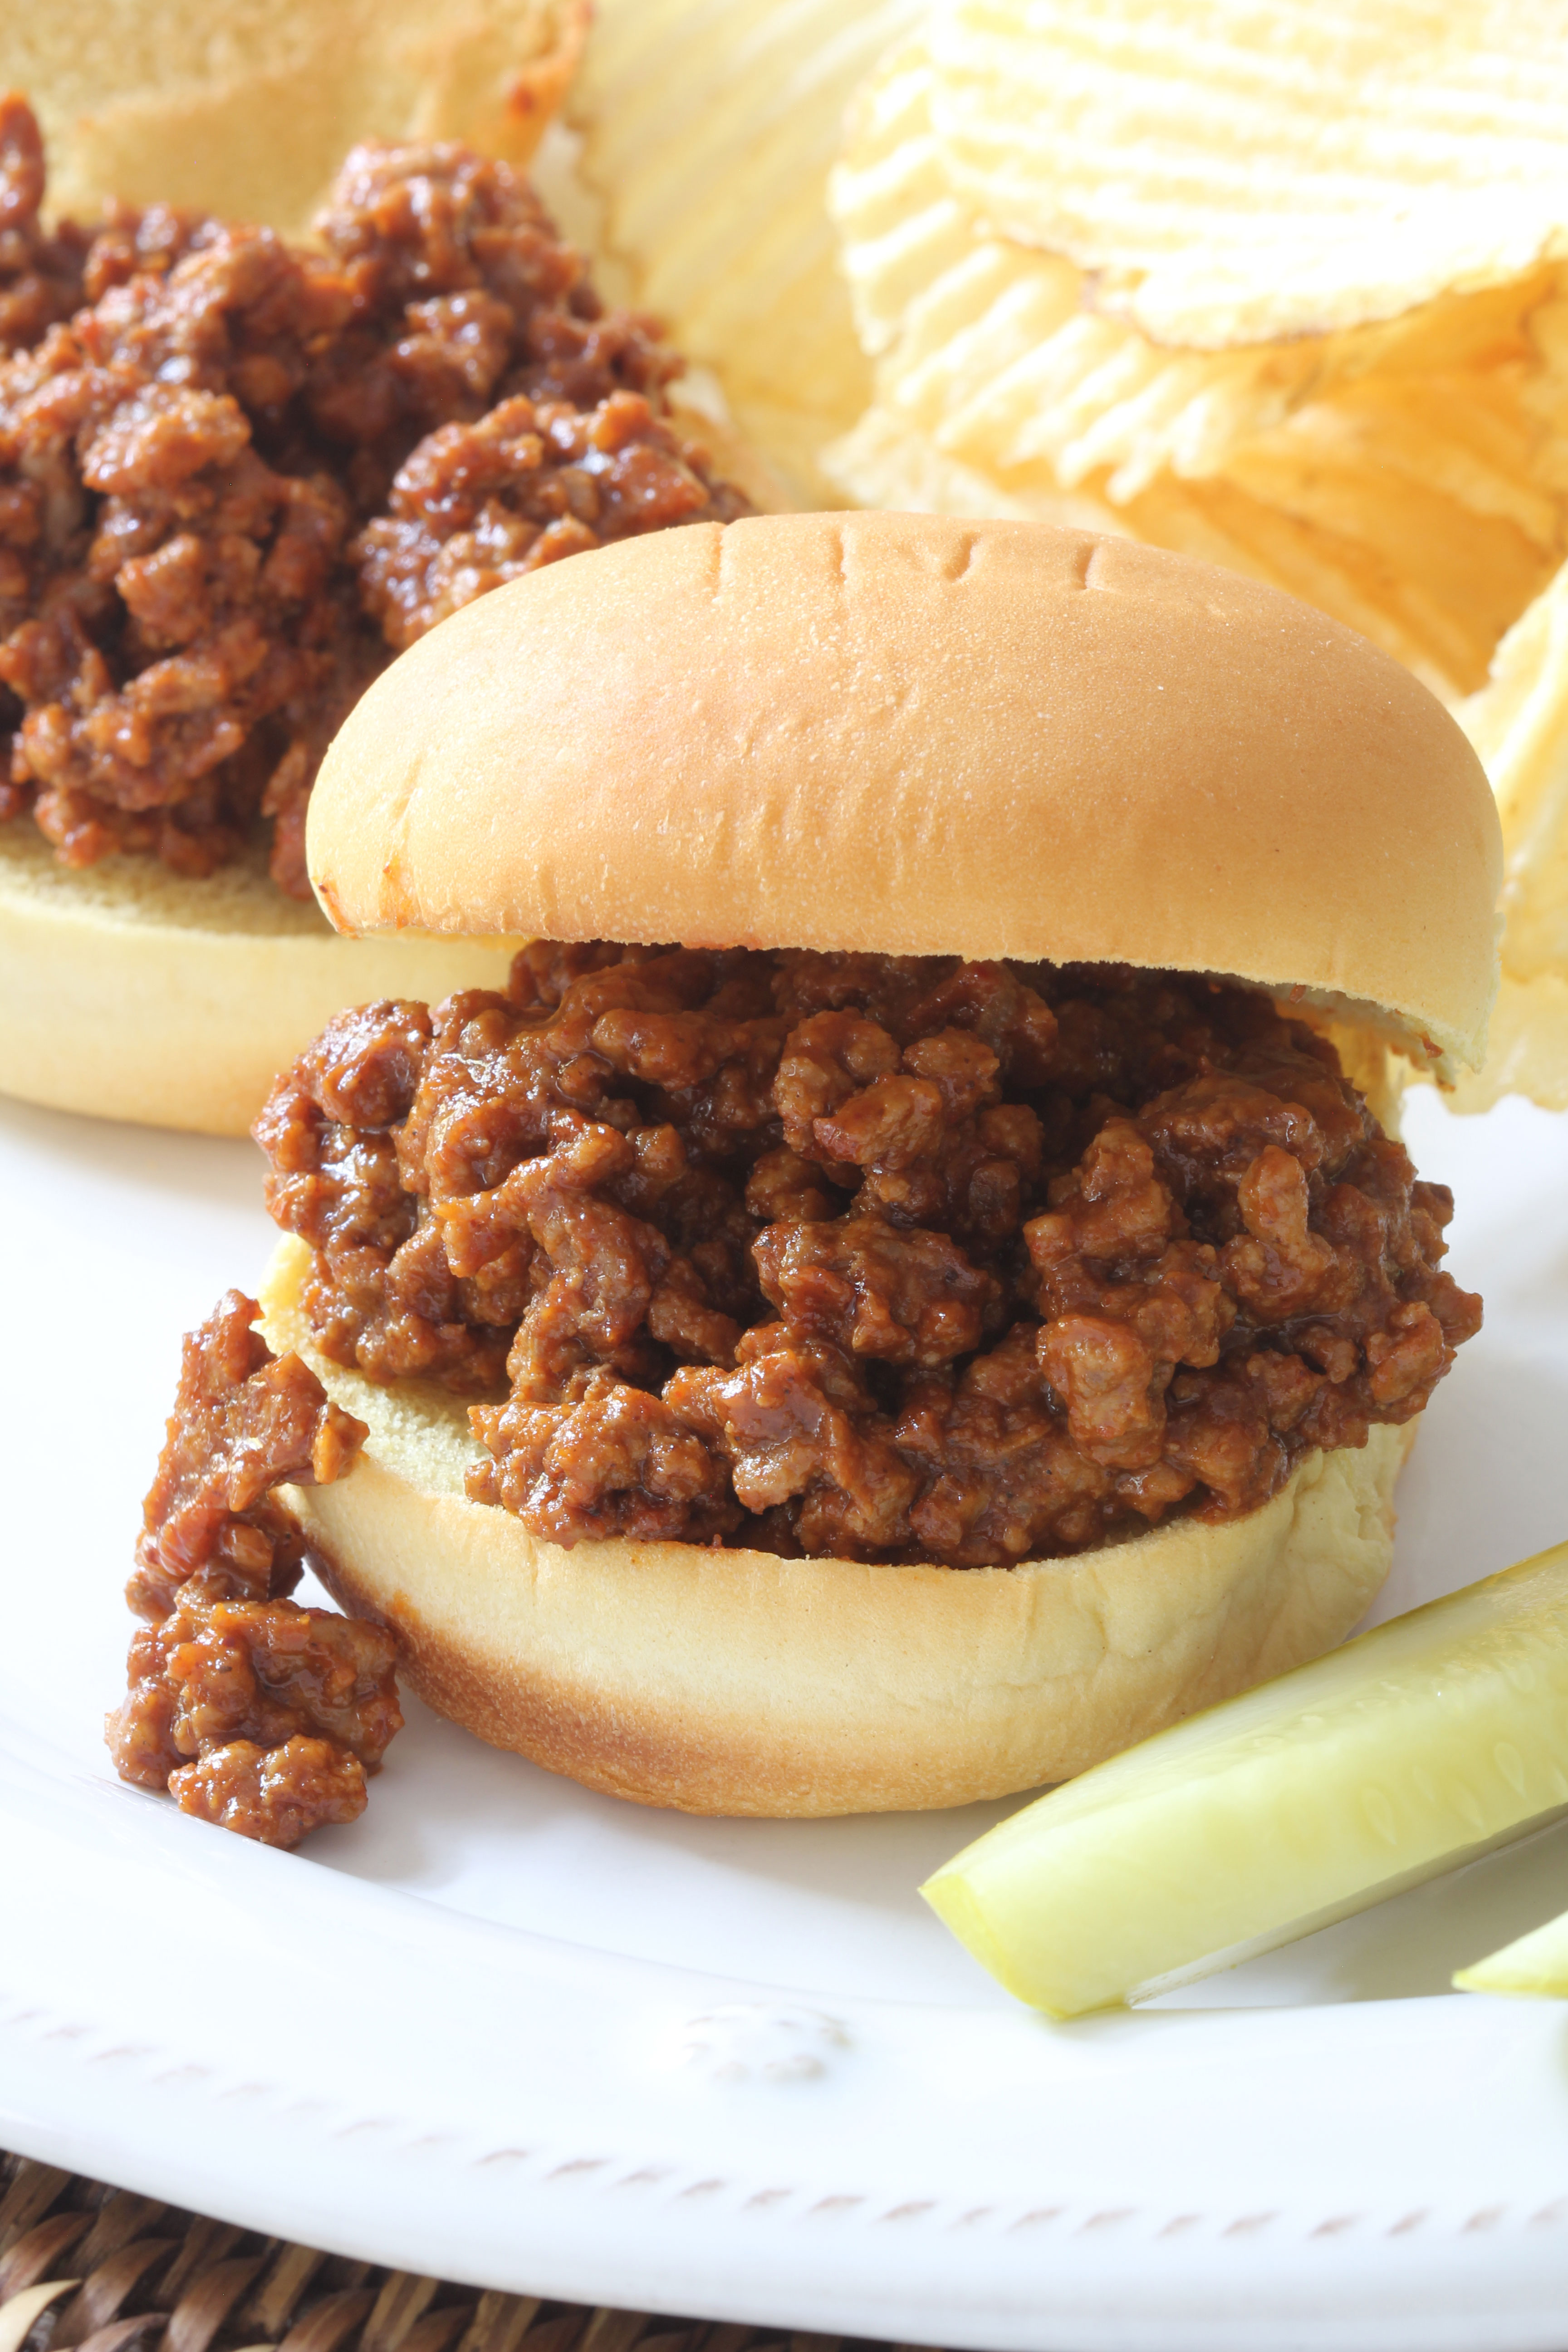 Ridgely Brode serves up delicious Sloppy Joe's made with spices from a local Connecticut source on her blog, Ridgely's Radar.